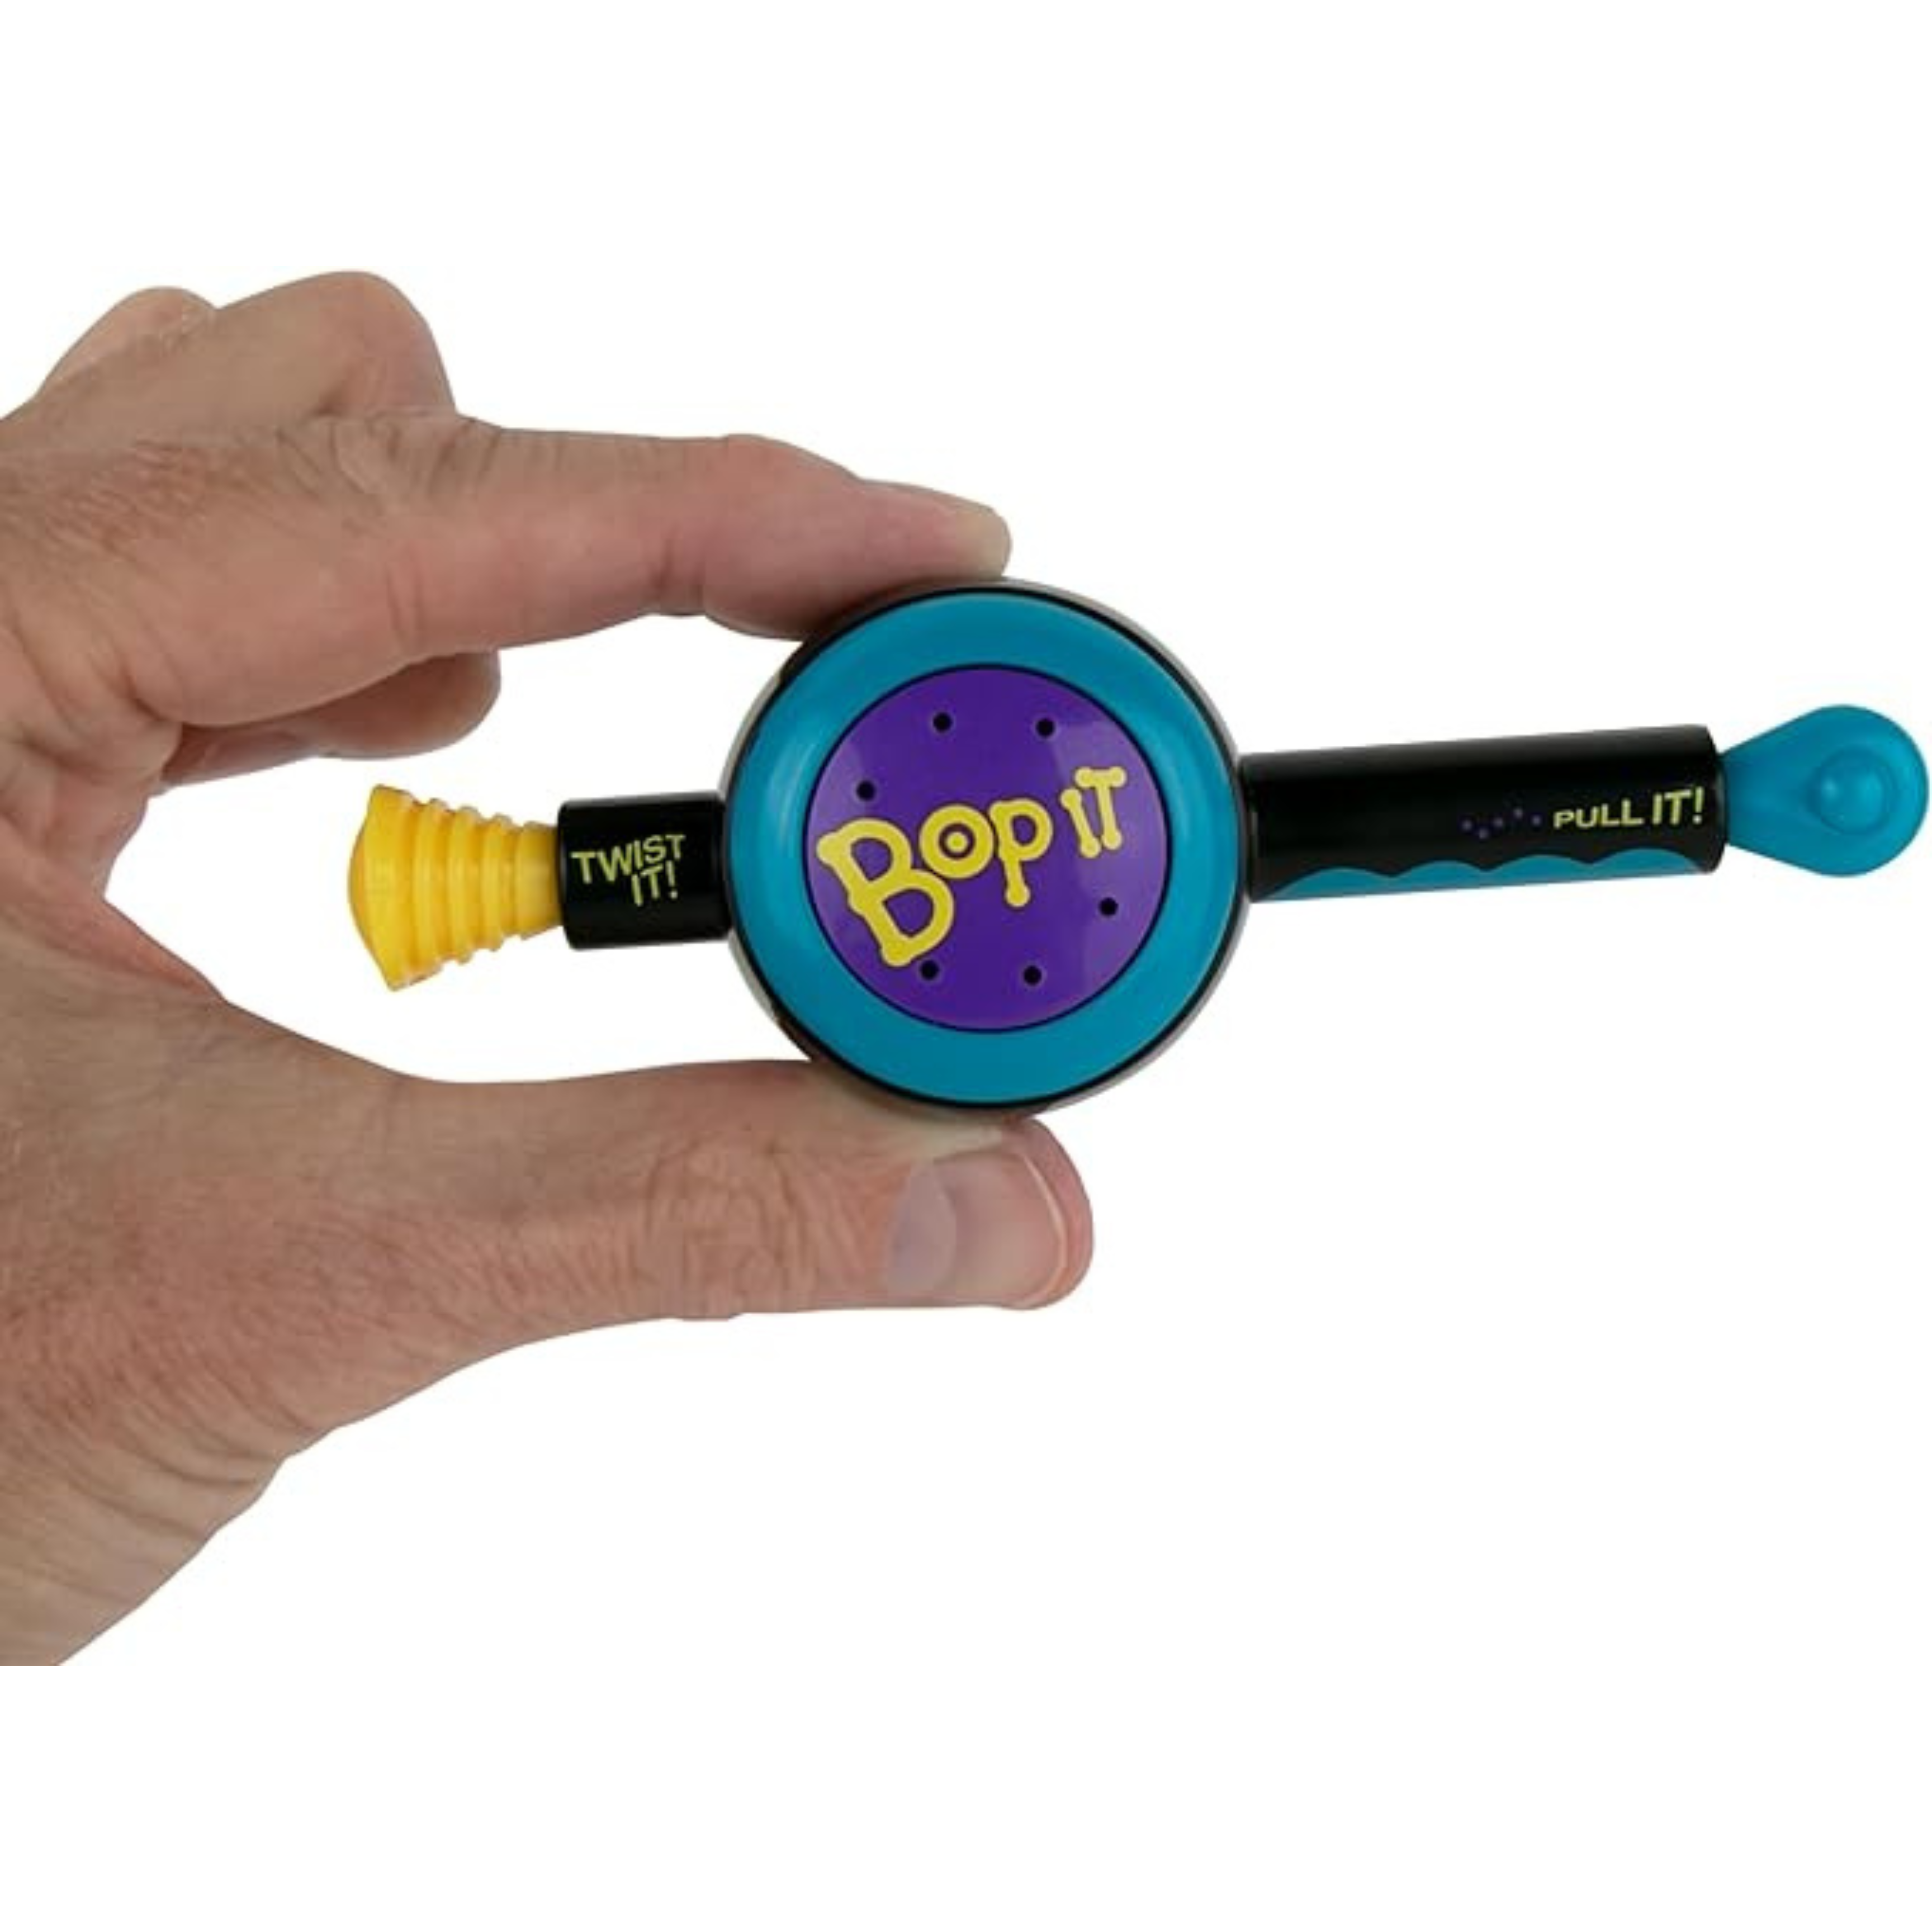 SPECIAL OFFER Bop It: The Card Game (pre-release limited edition)